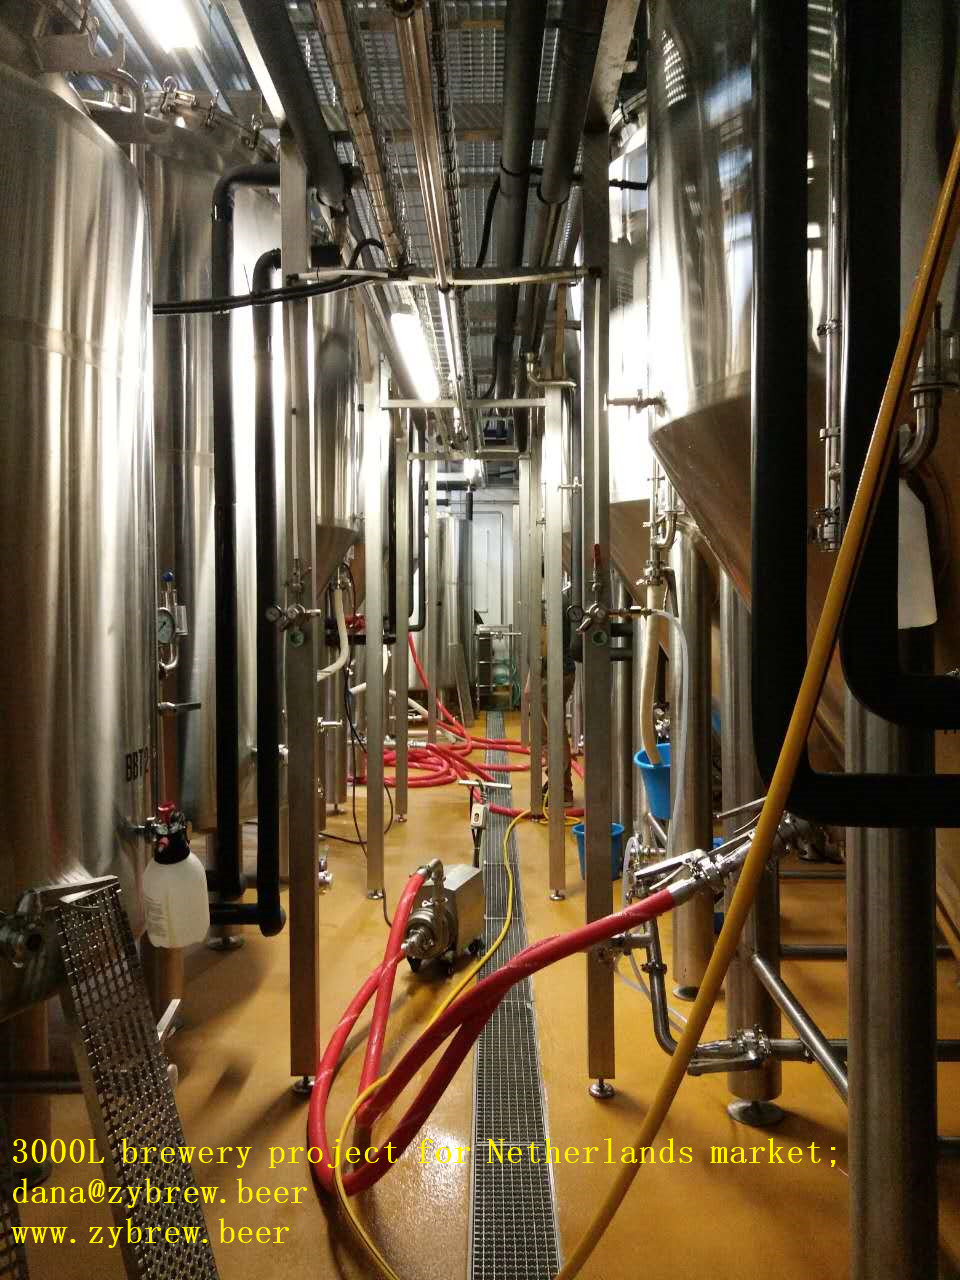 3000L brewery project